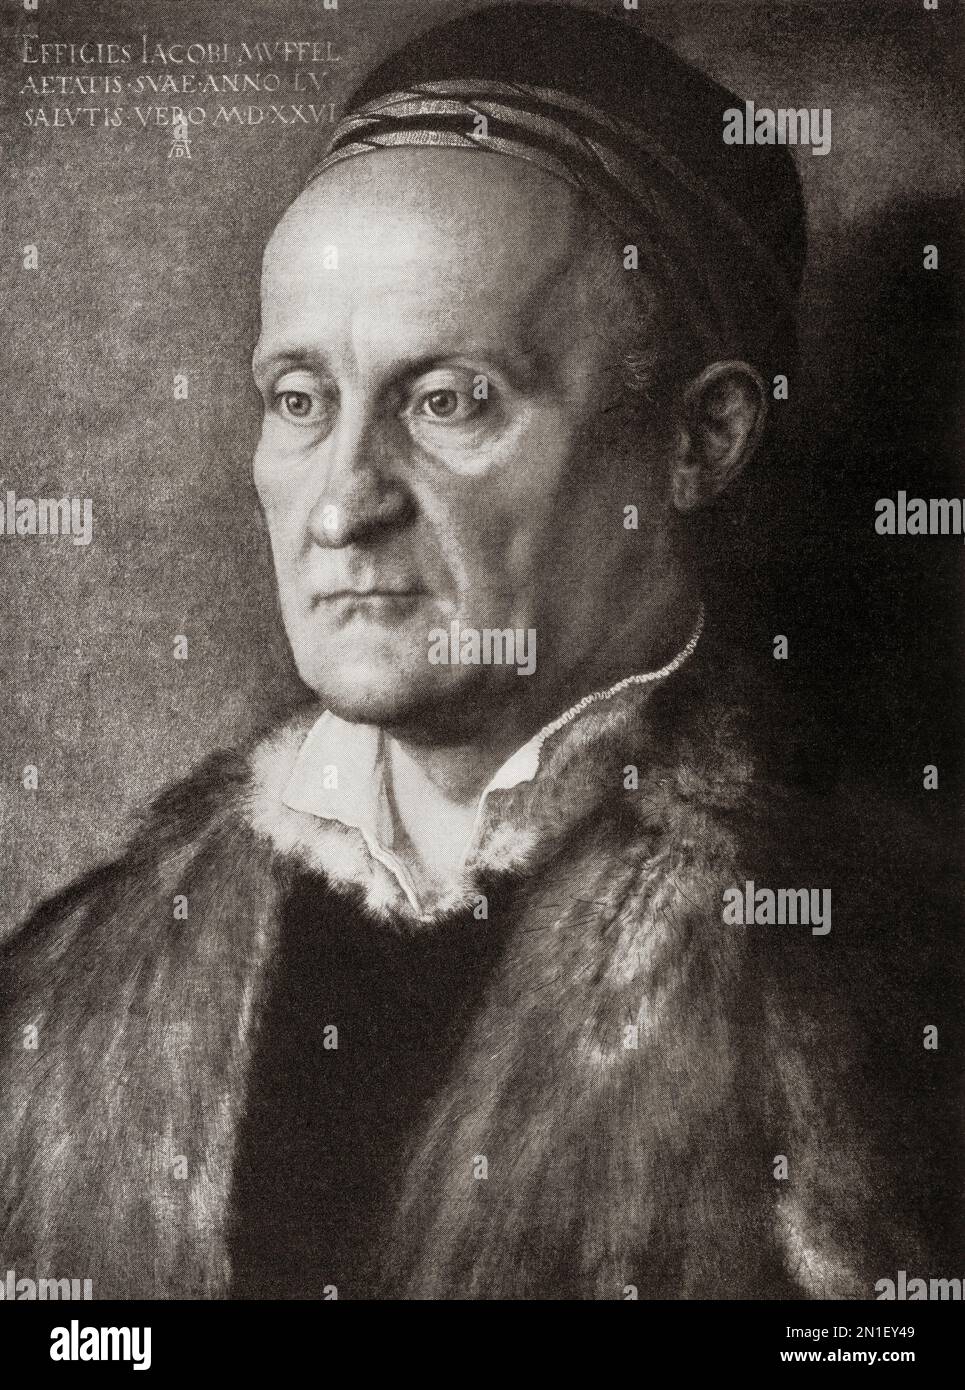 Portrait of Jakob Muffel (1471-1526), after the work by Albrecht Dürer , 1471 – 1528,  sometimes spelled in English as Durer.  German painter, printmaker, and theorist of the German Renaissance.  From Albrecht Dürer, Sein Leben und eine Auswahl seiner Werke or His life and a selection of his works, published 1928. Stock Photo